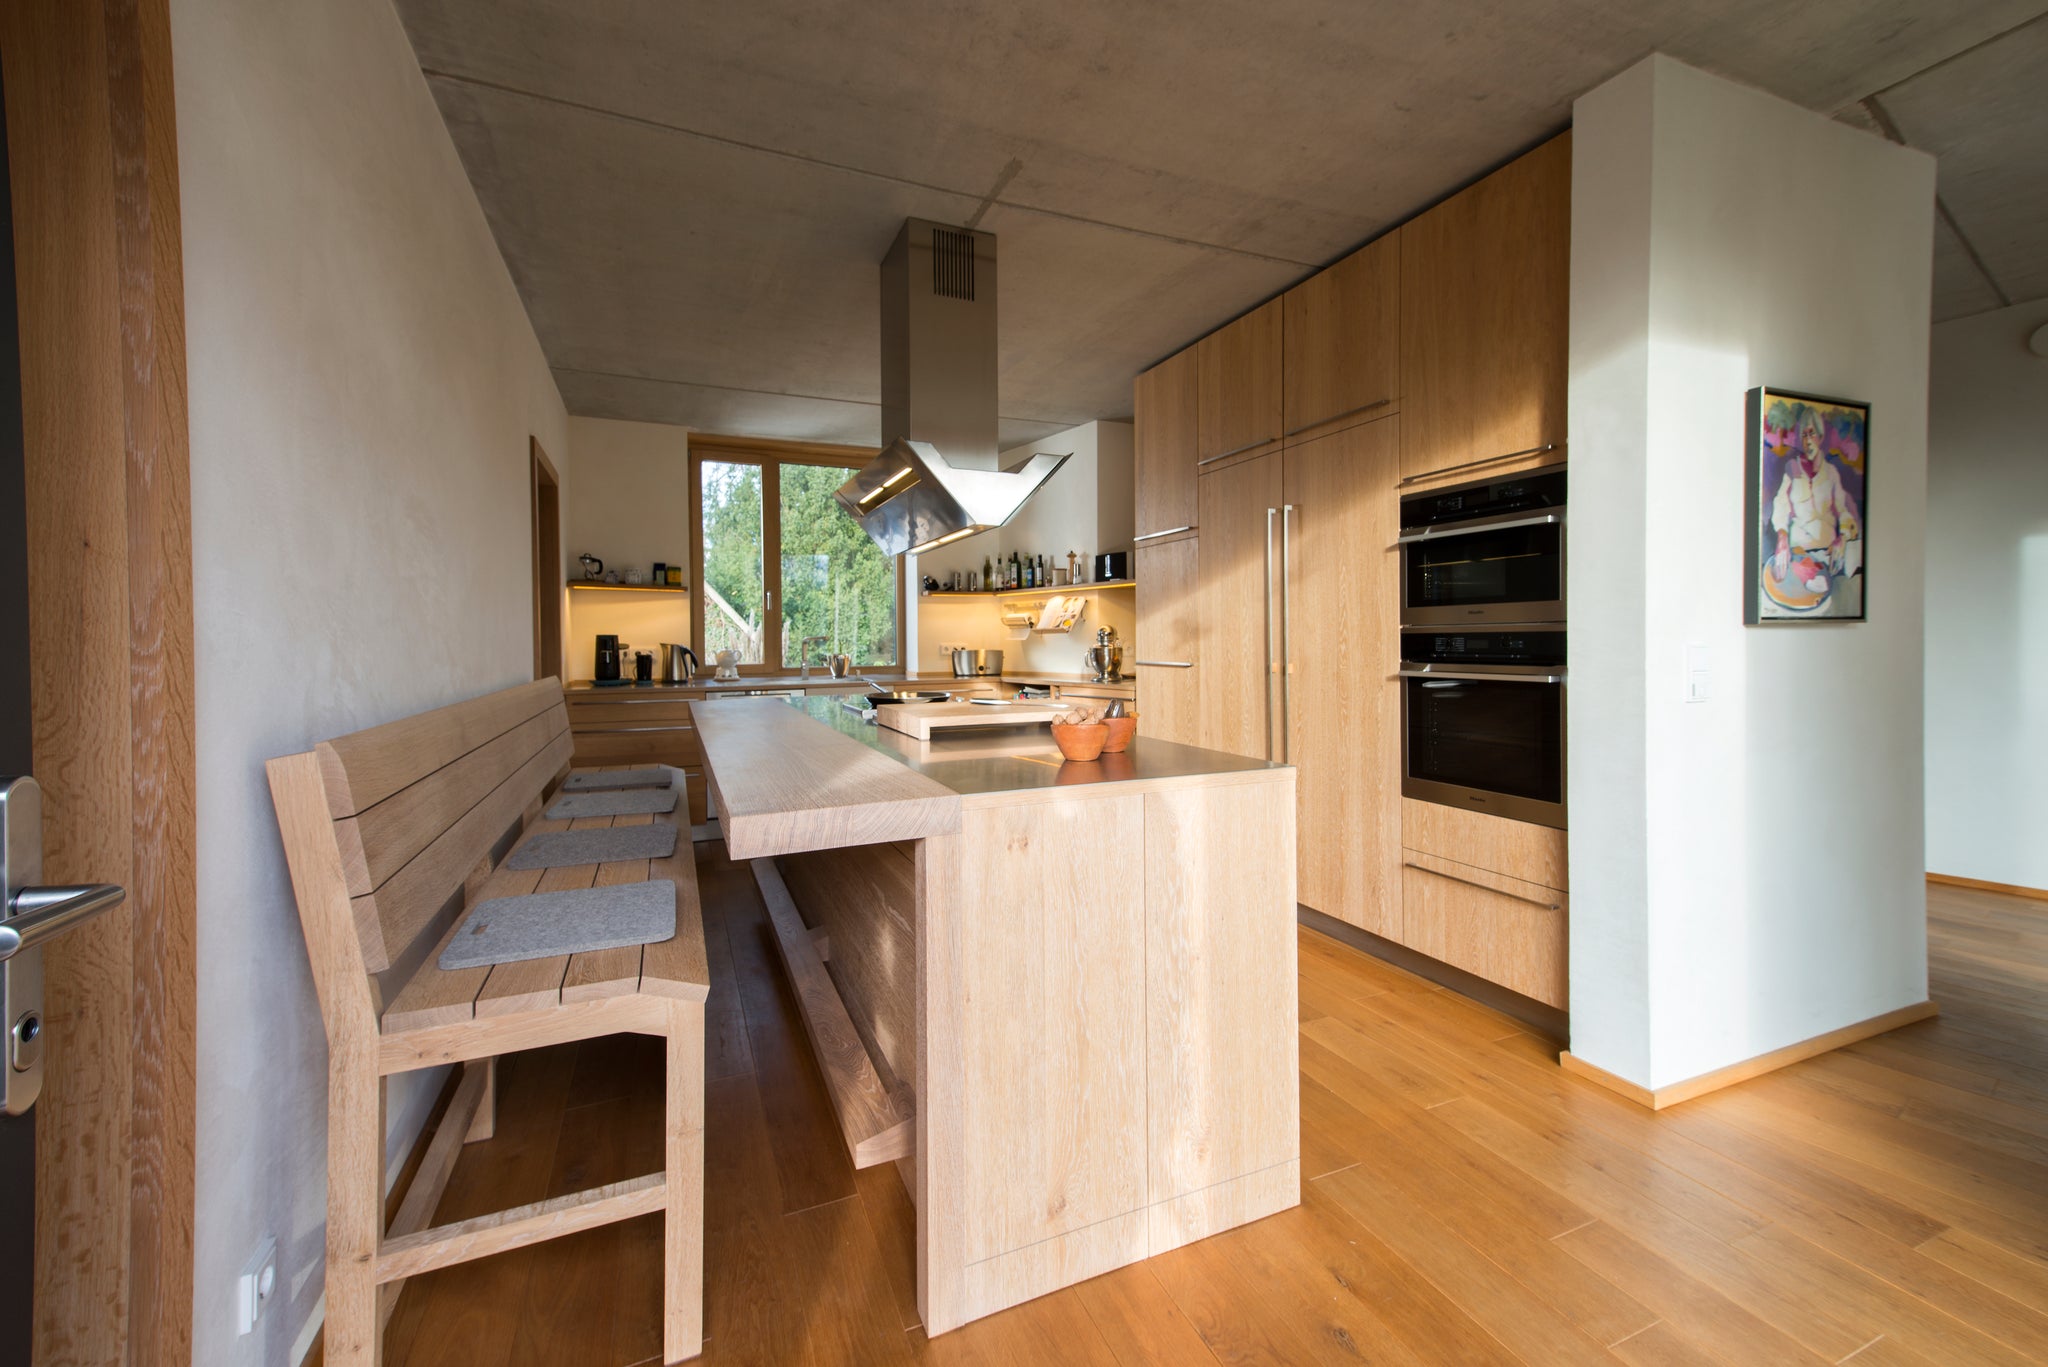 The key word is massive. There is oak as far as the eye can see in this large and spacious kitchen.